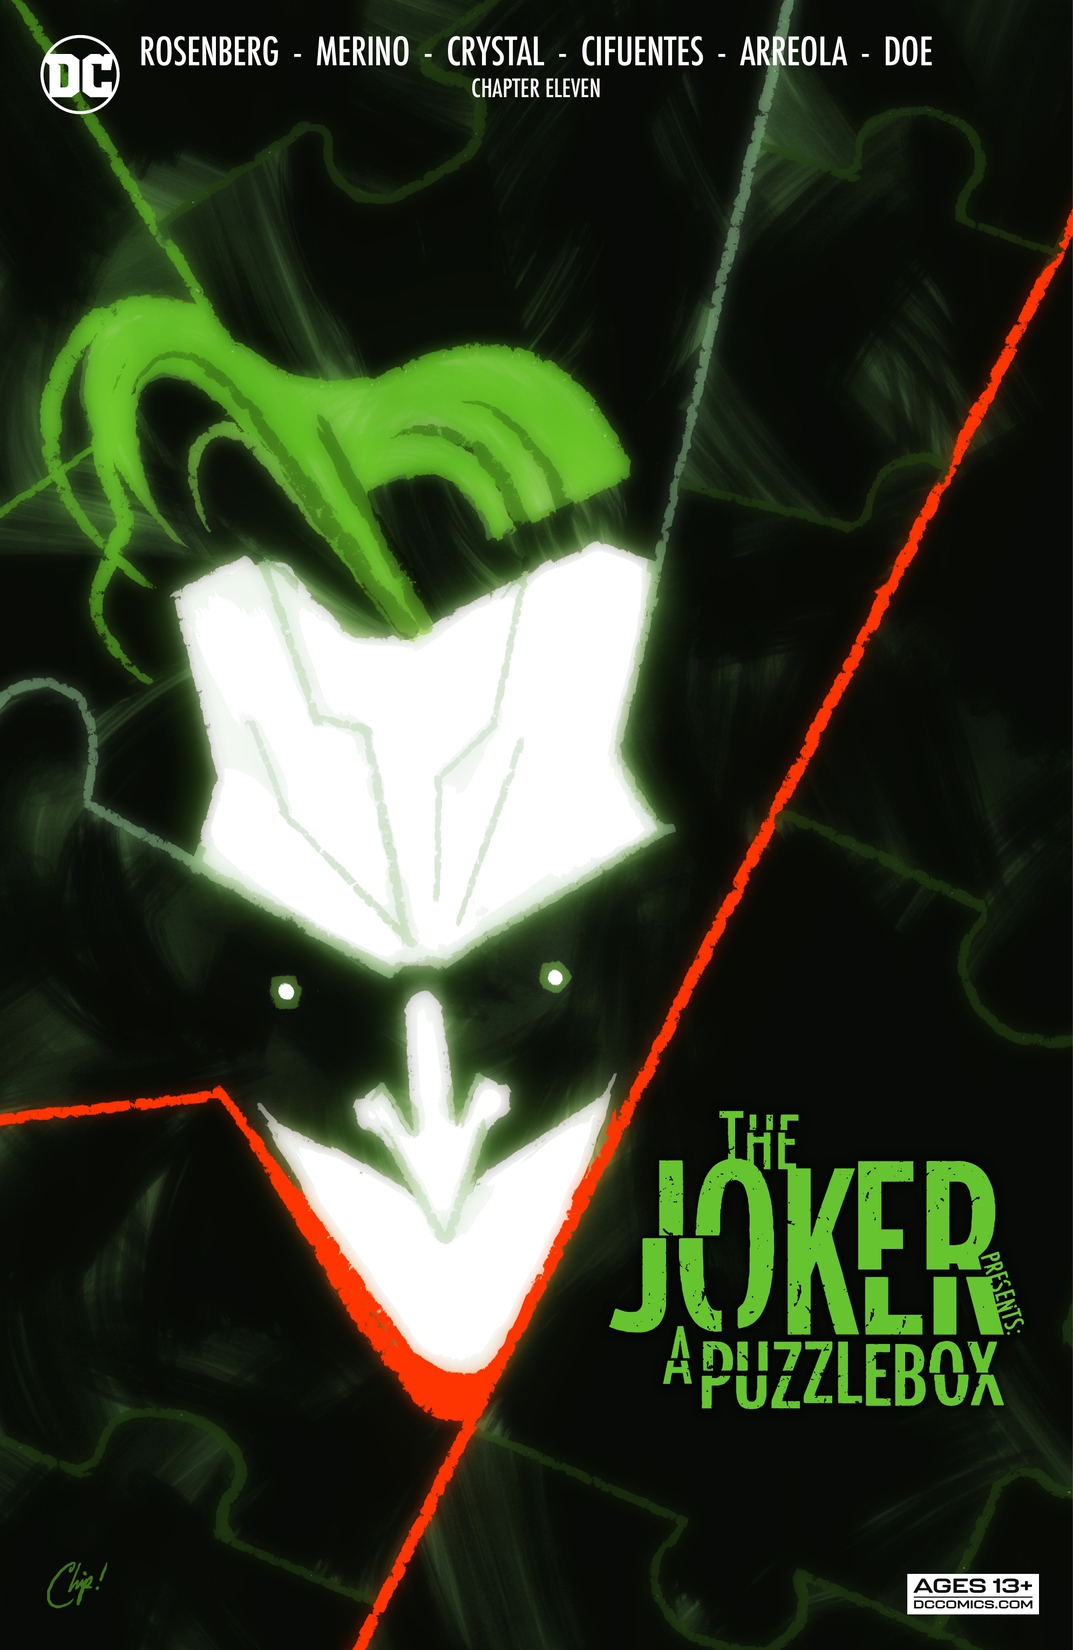 The Joker Presents: A Puzzlebox Director's Cut #11 preview images